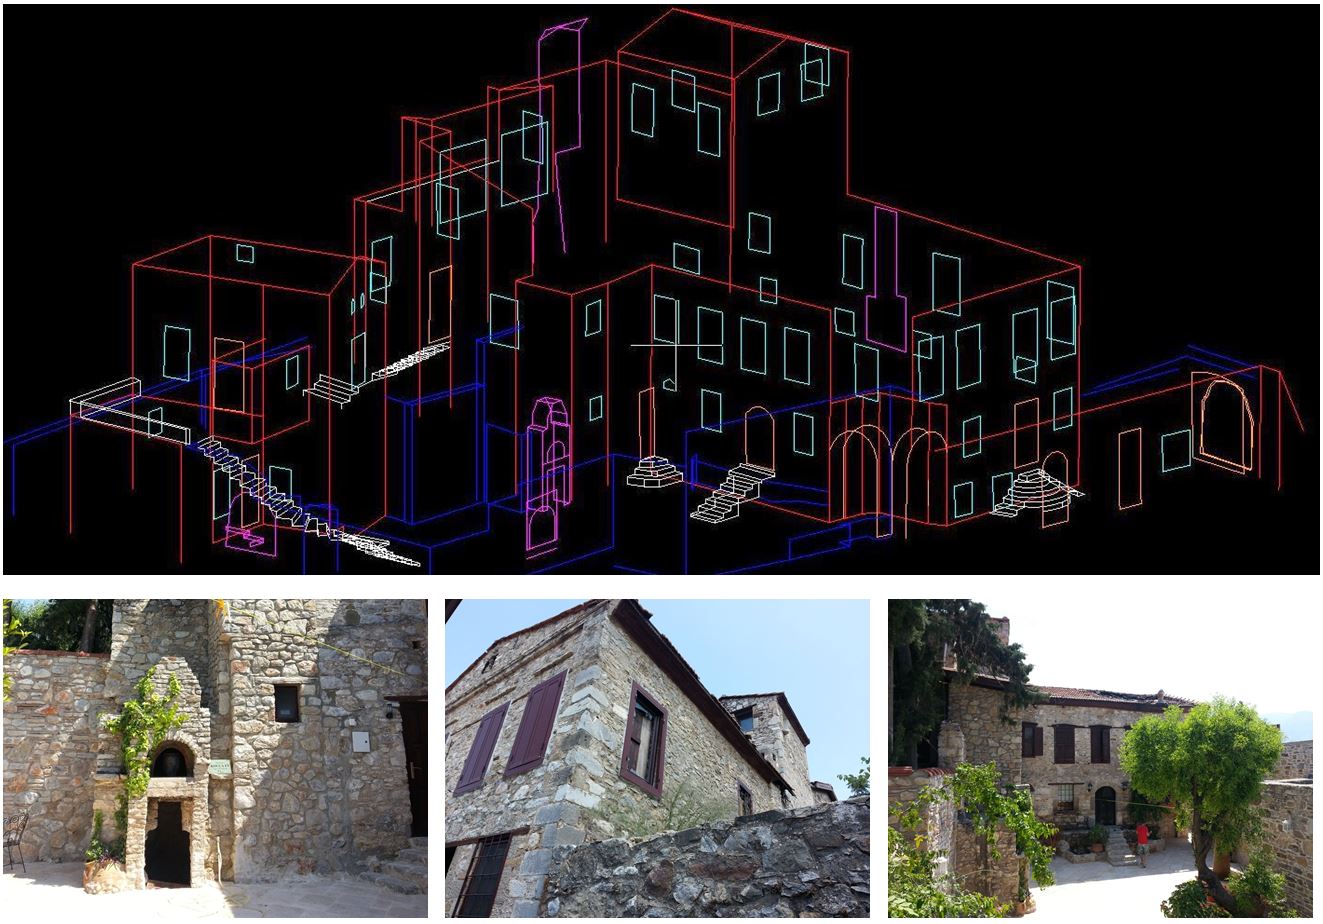 3D Surveying Measurement Studies of Buildings with a Total Area of 330m2